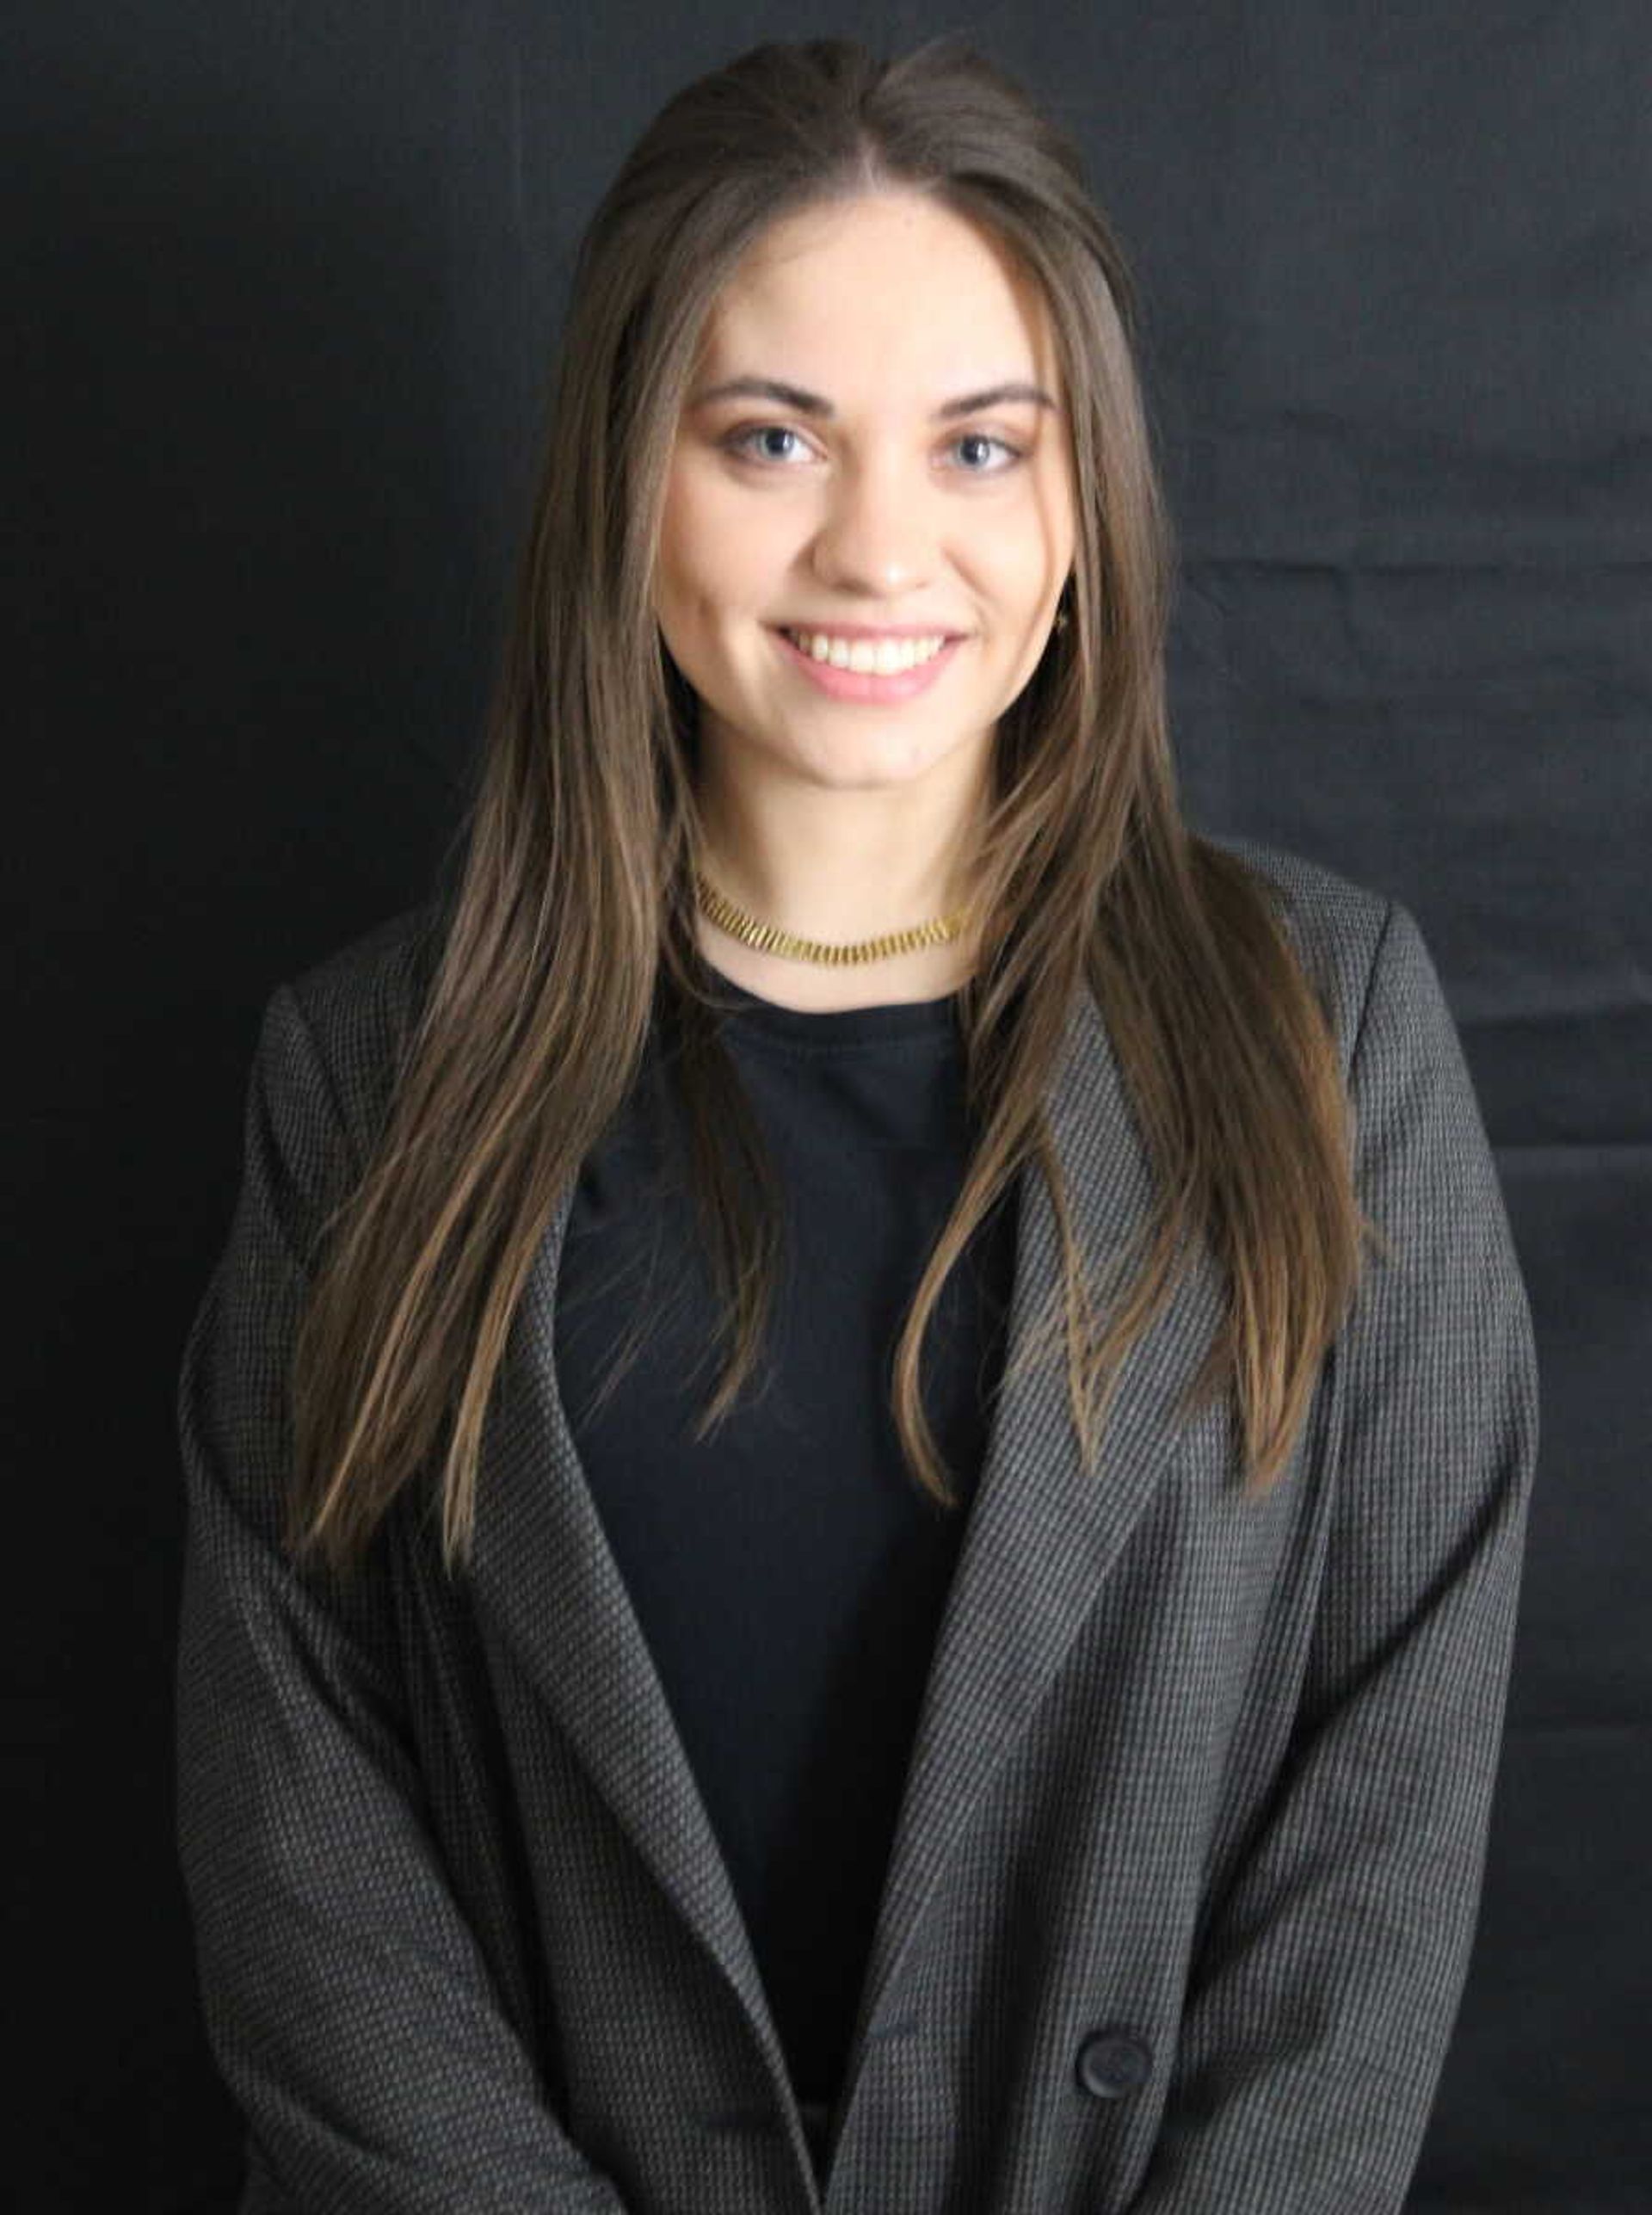 Victoria Kozyreva is a student from Russia, studying for her master's in business administration.